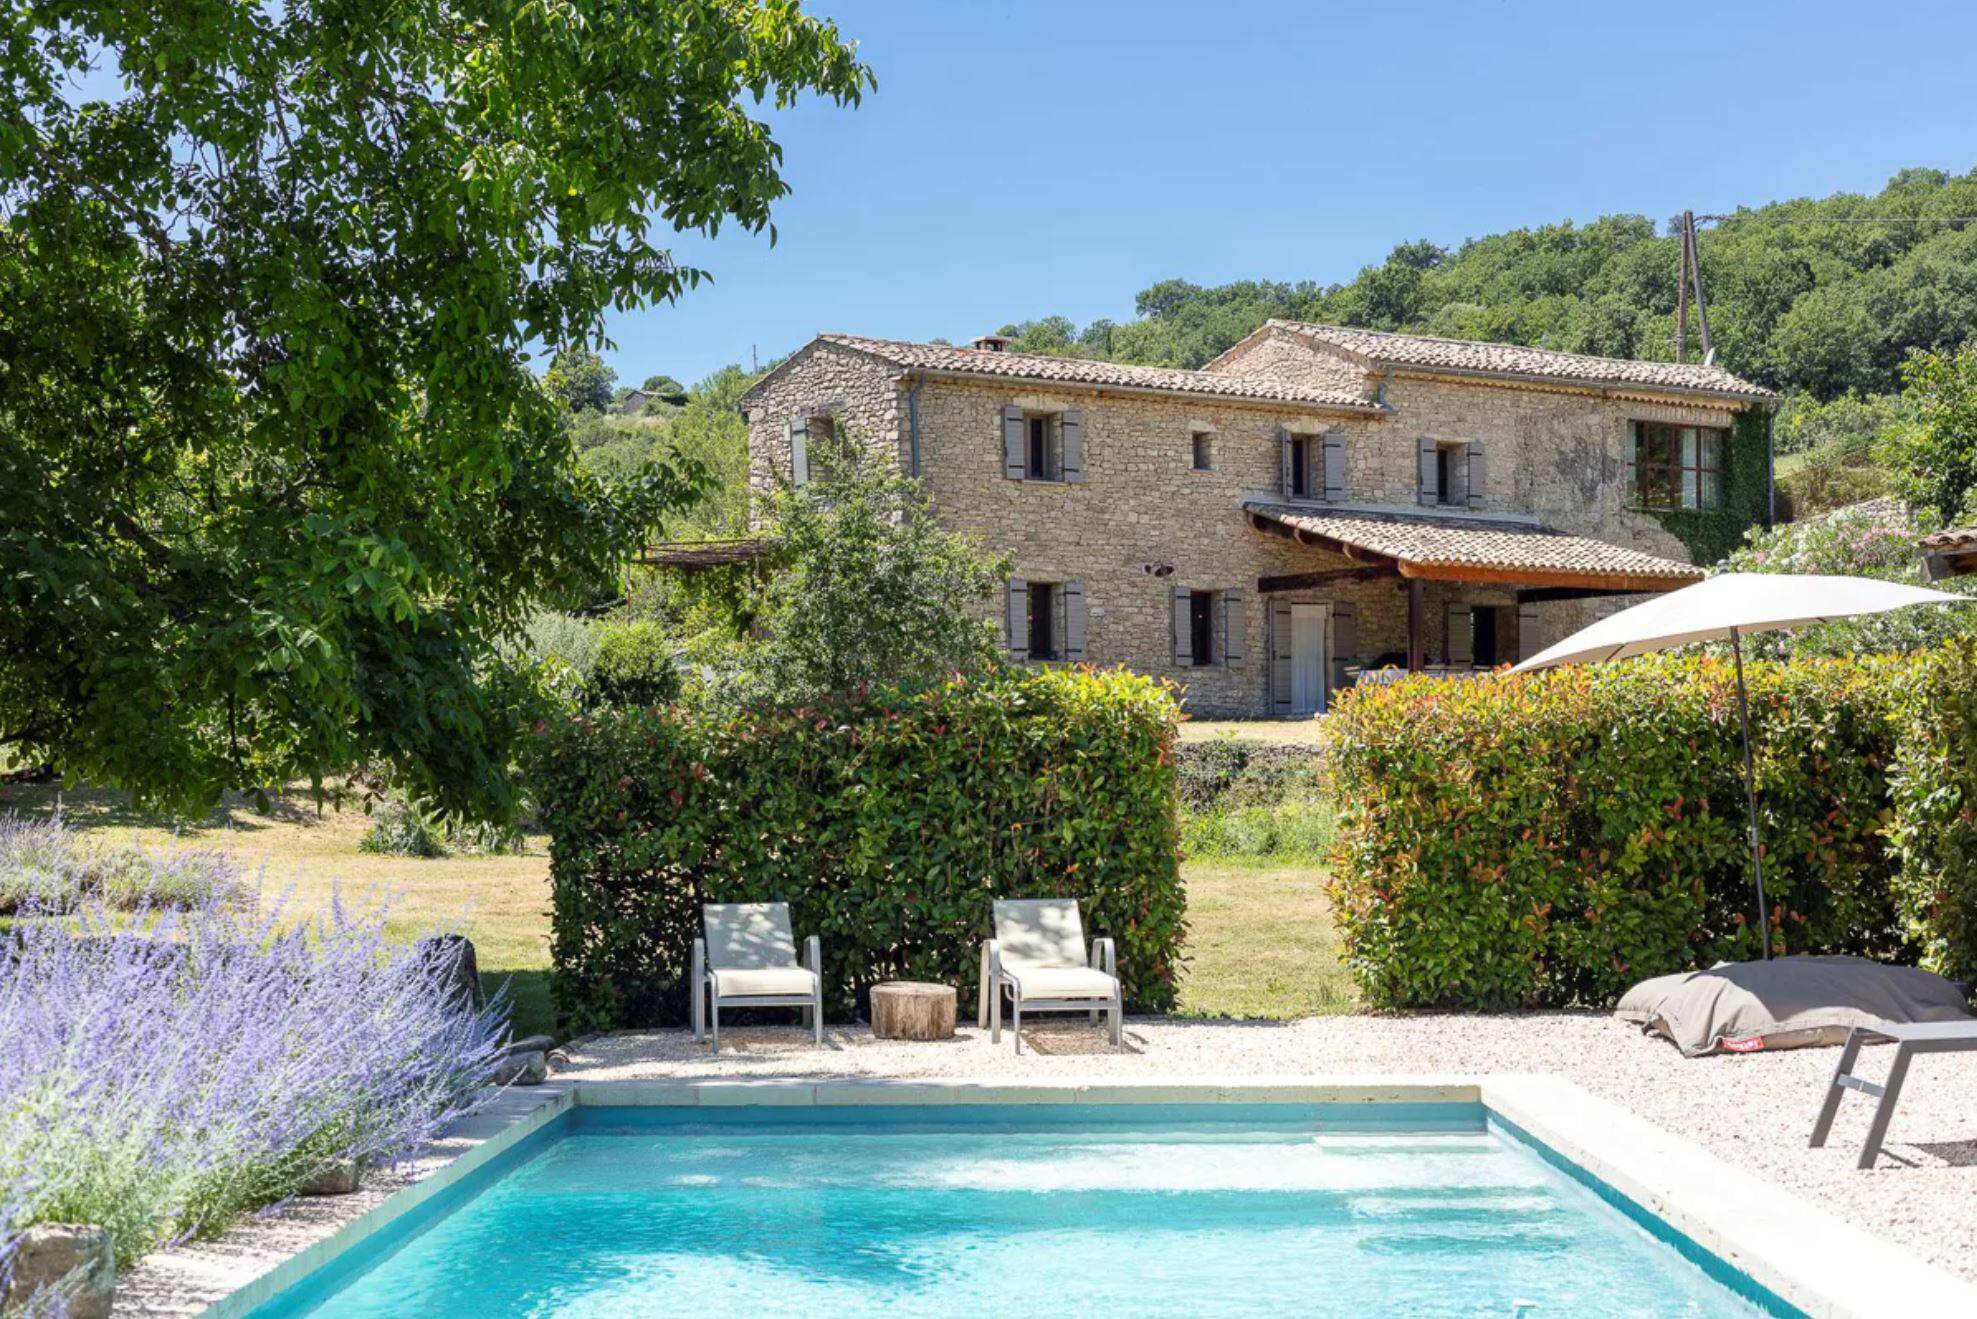 Prime hotspots in France: 4 locations for luxury property investment